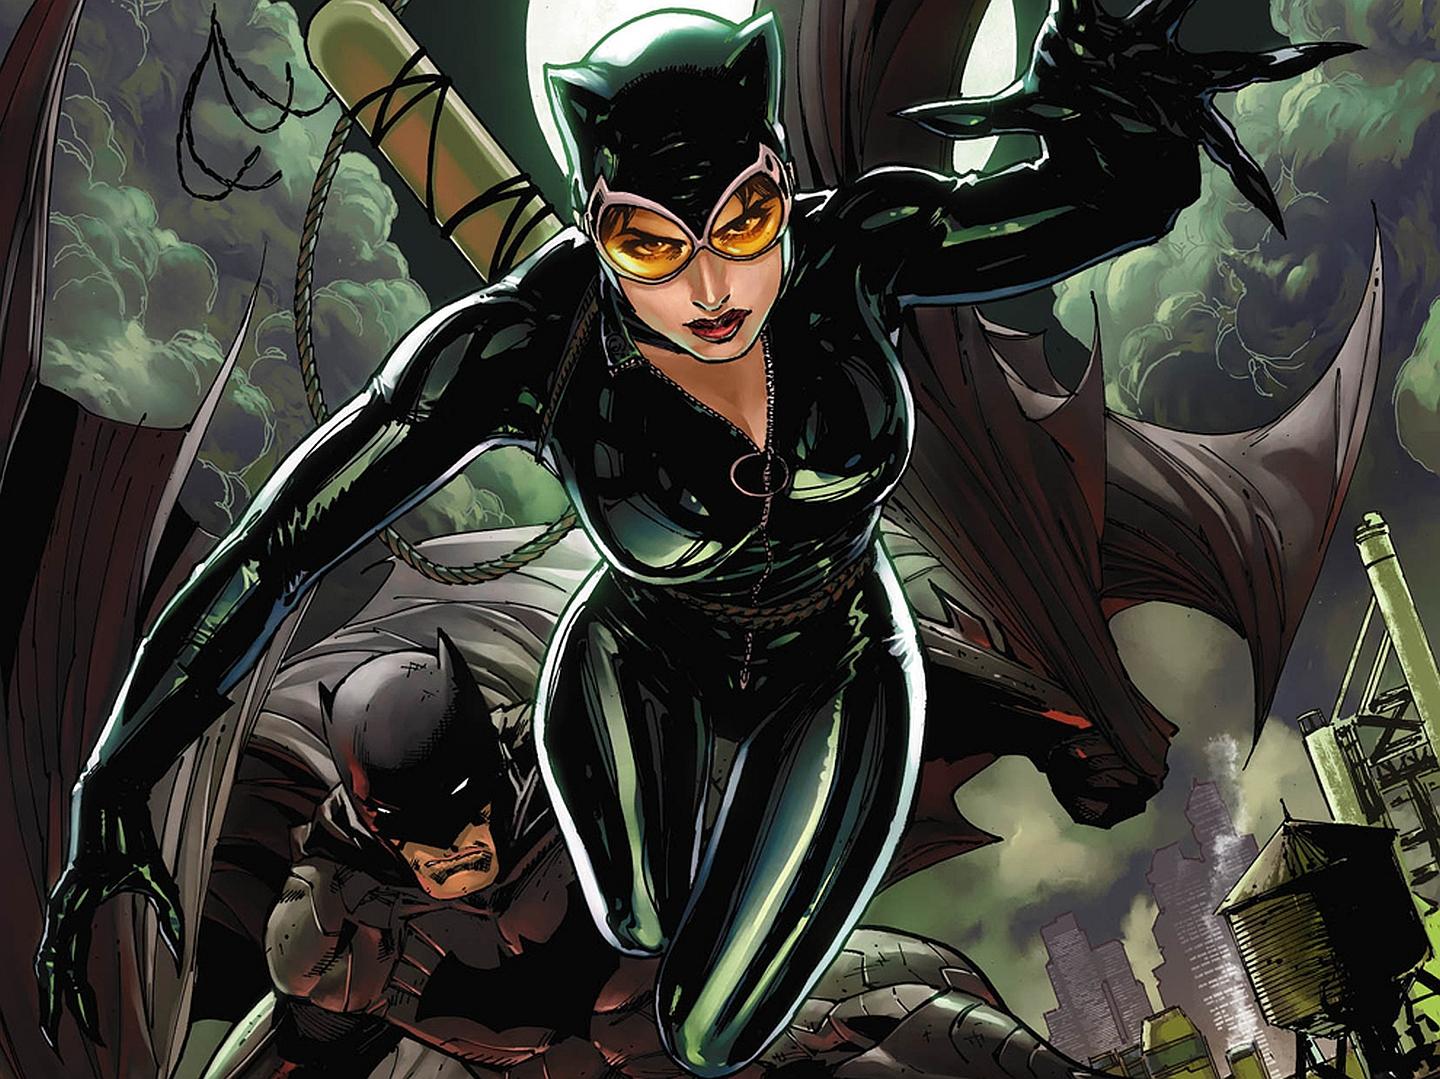 60+ Hot Pictures Of Catwoman From DC Comics 18